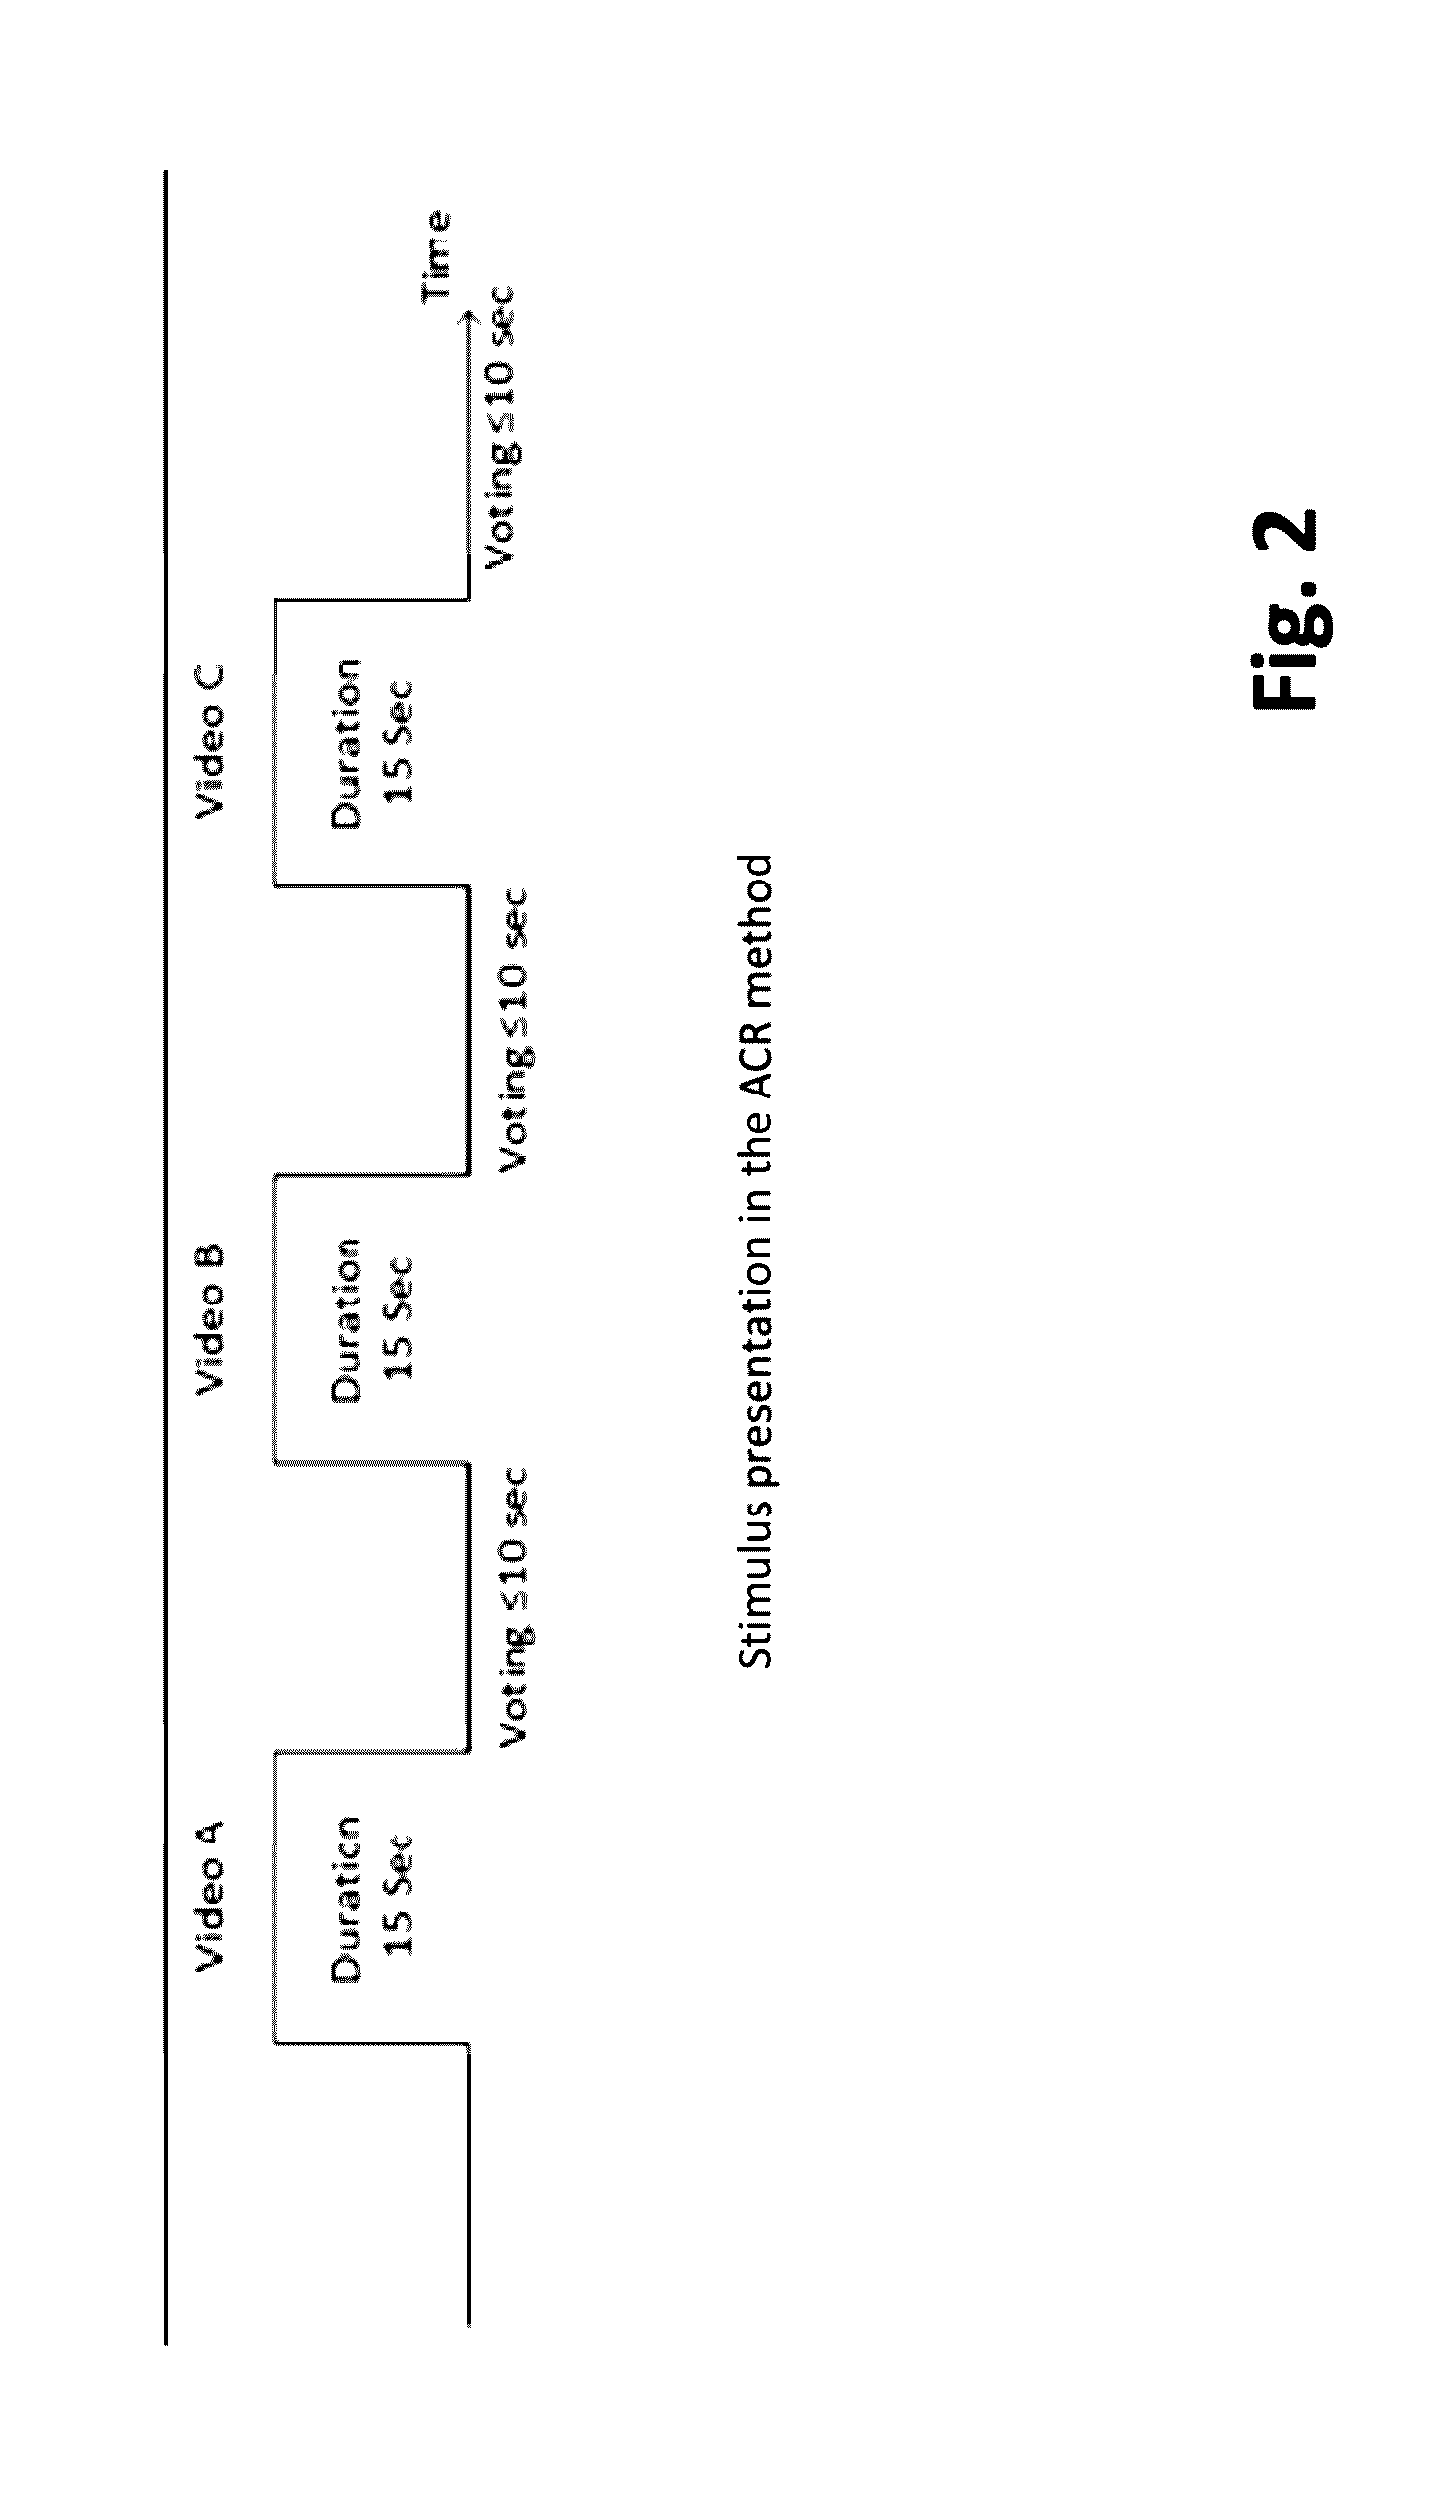 Mobile video quality prediction systems and methods